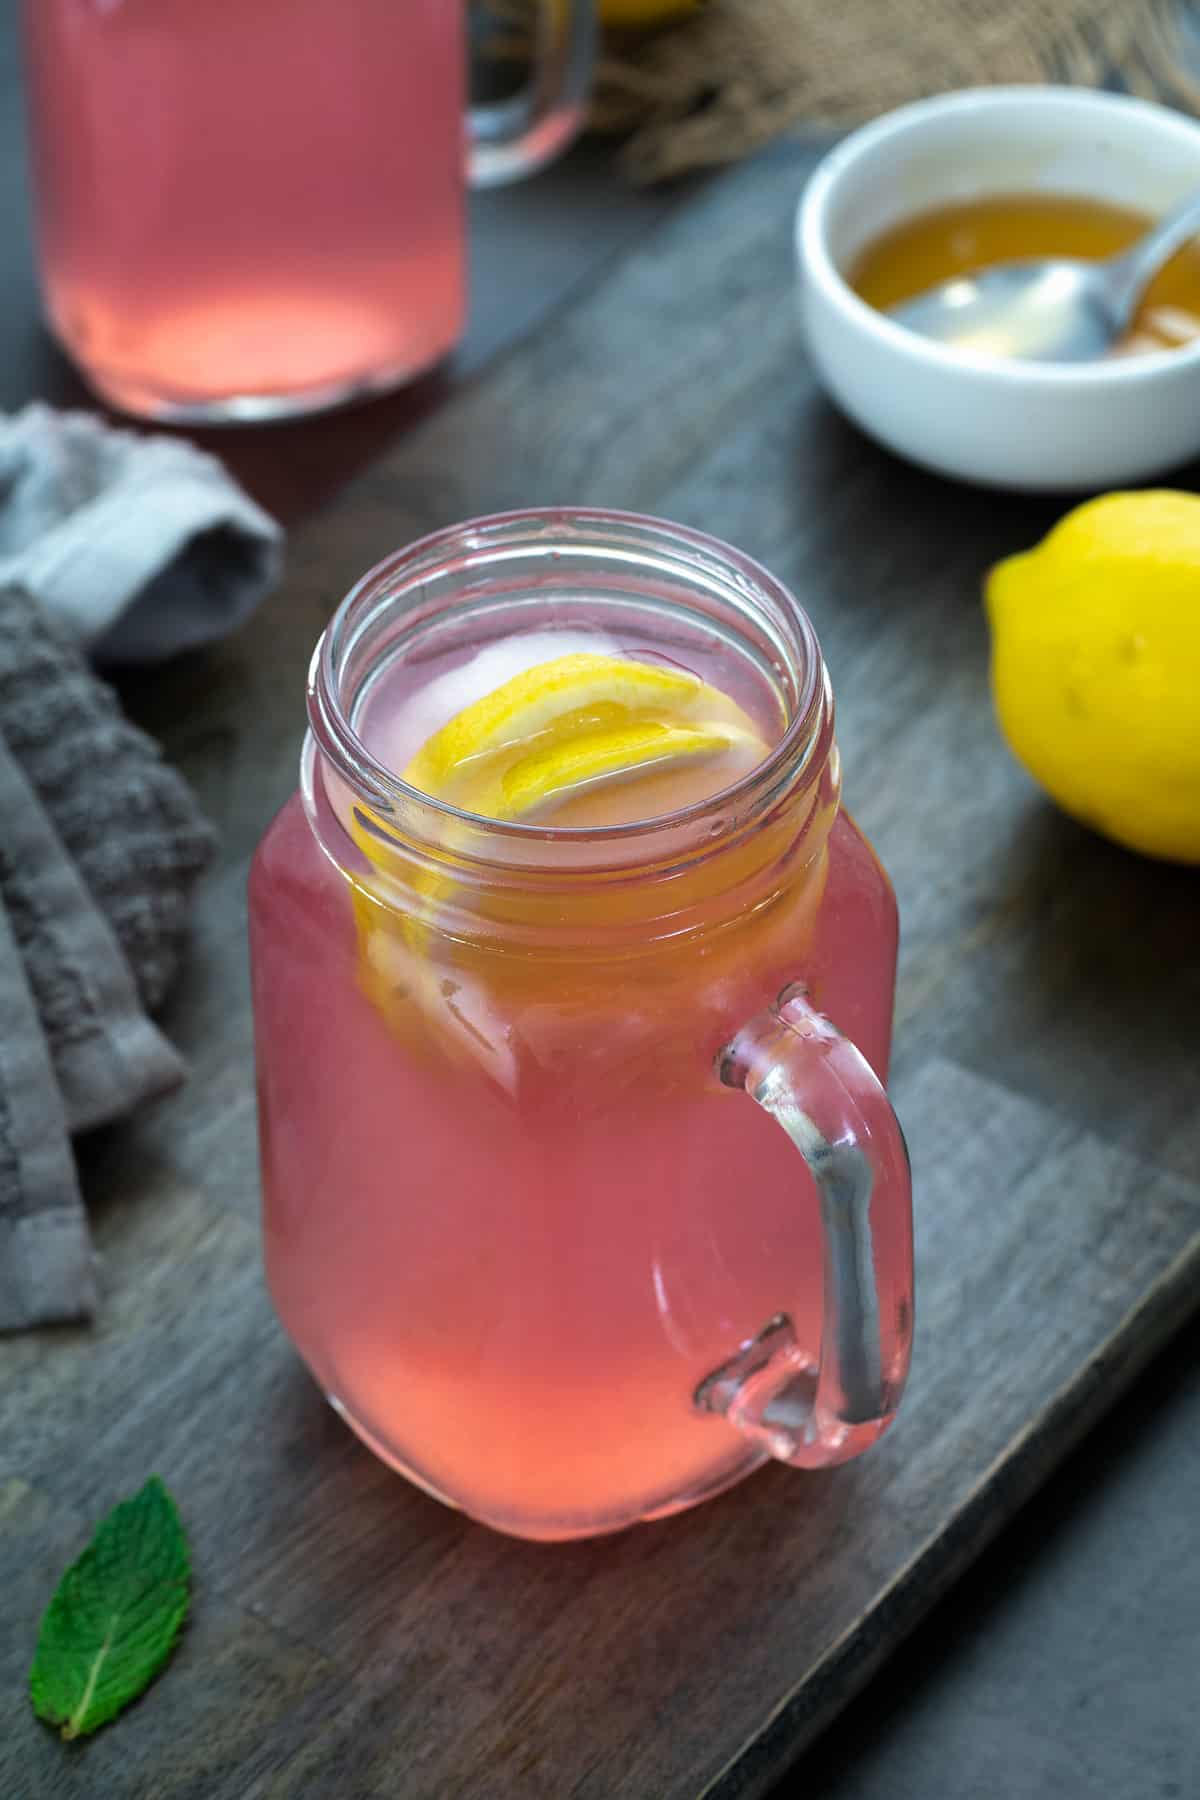 Pink Lemonade in a serving mug. Honey and lemon placed nearby.